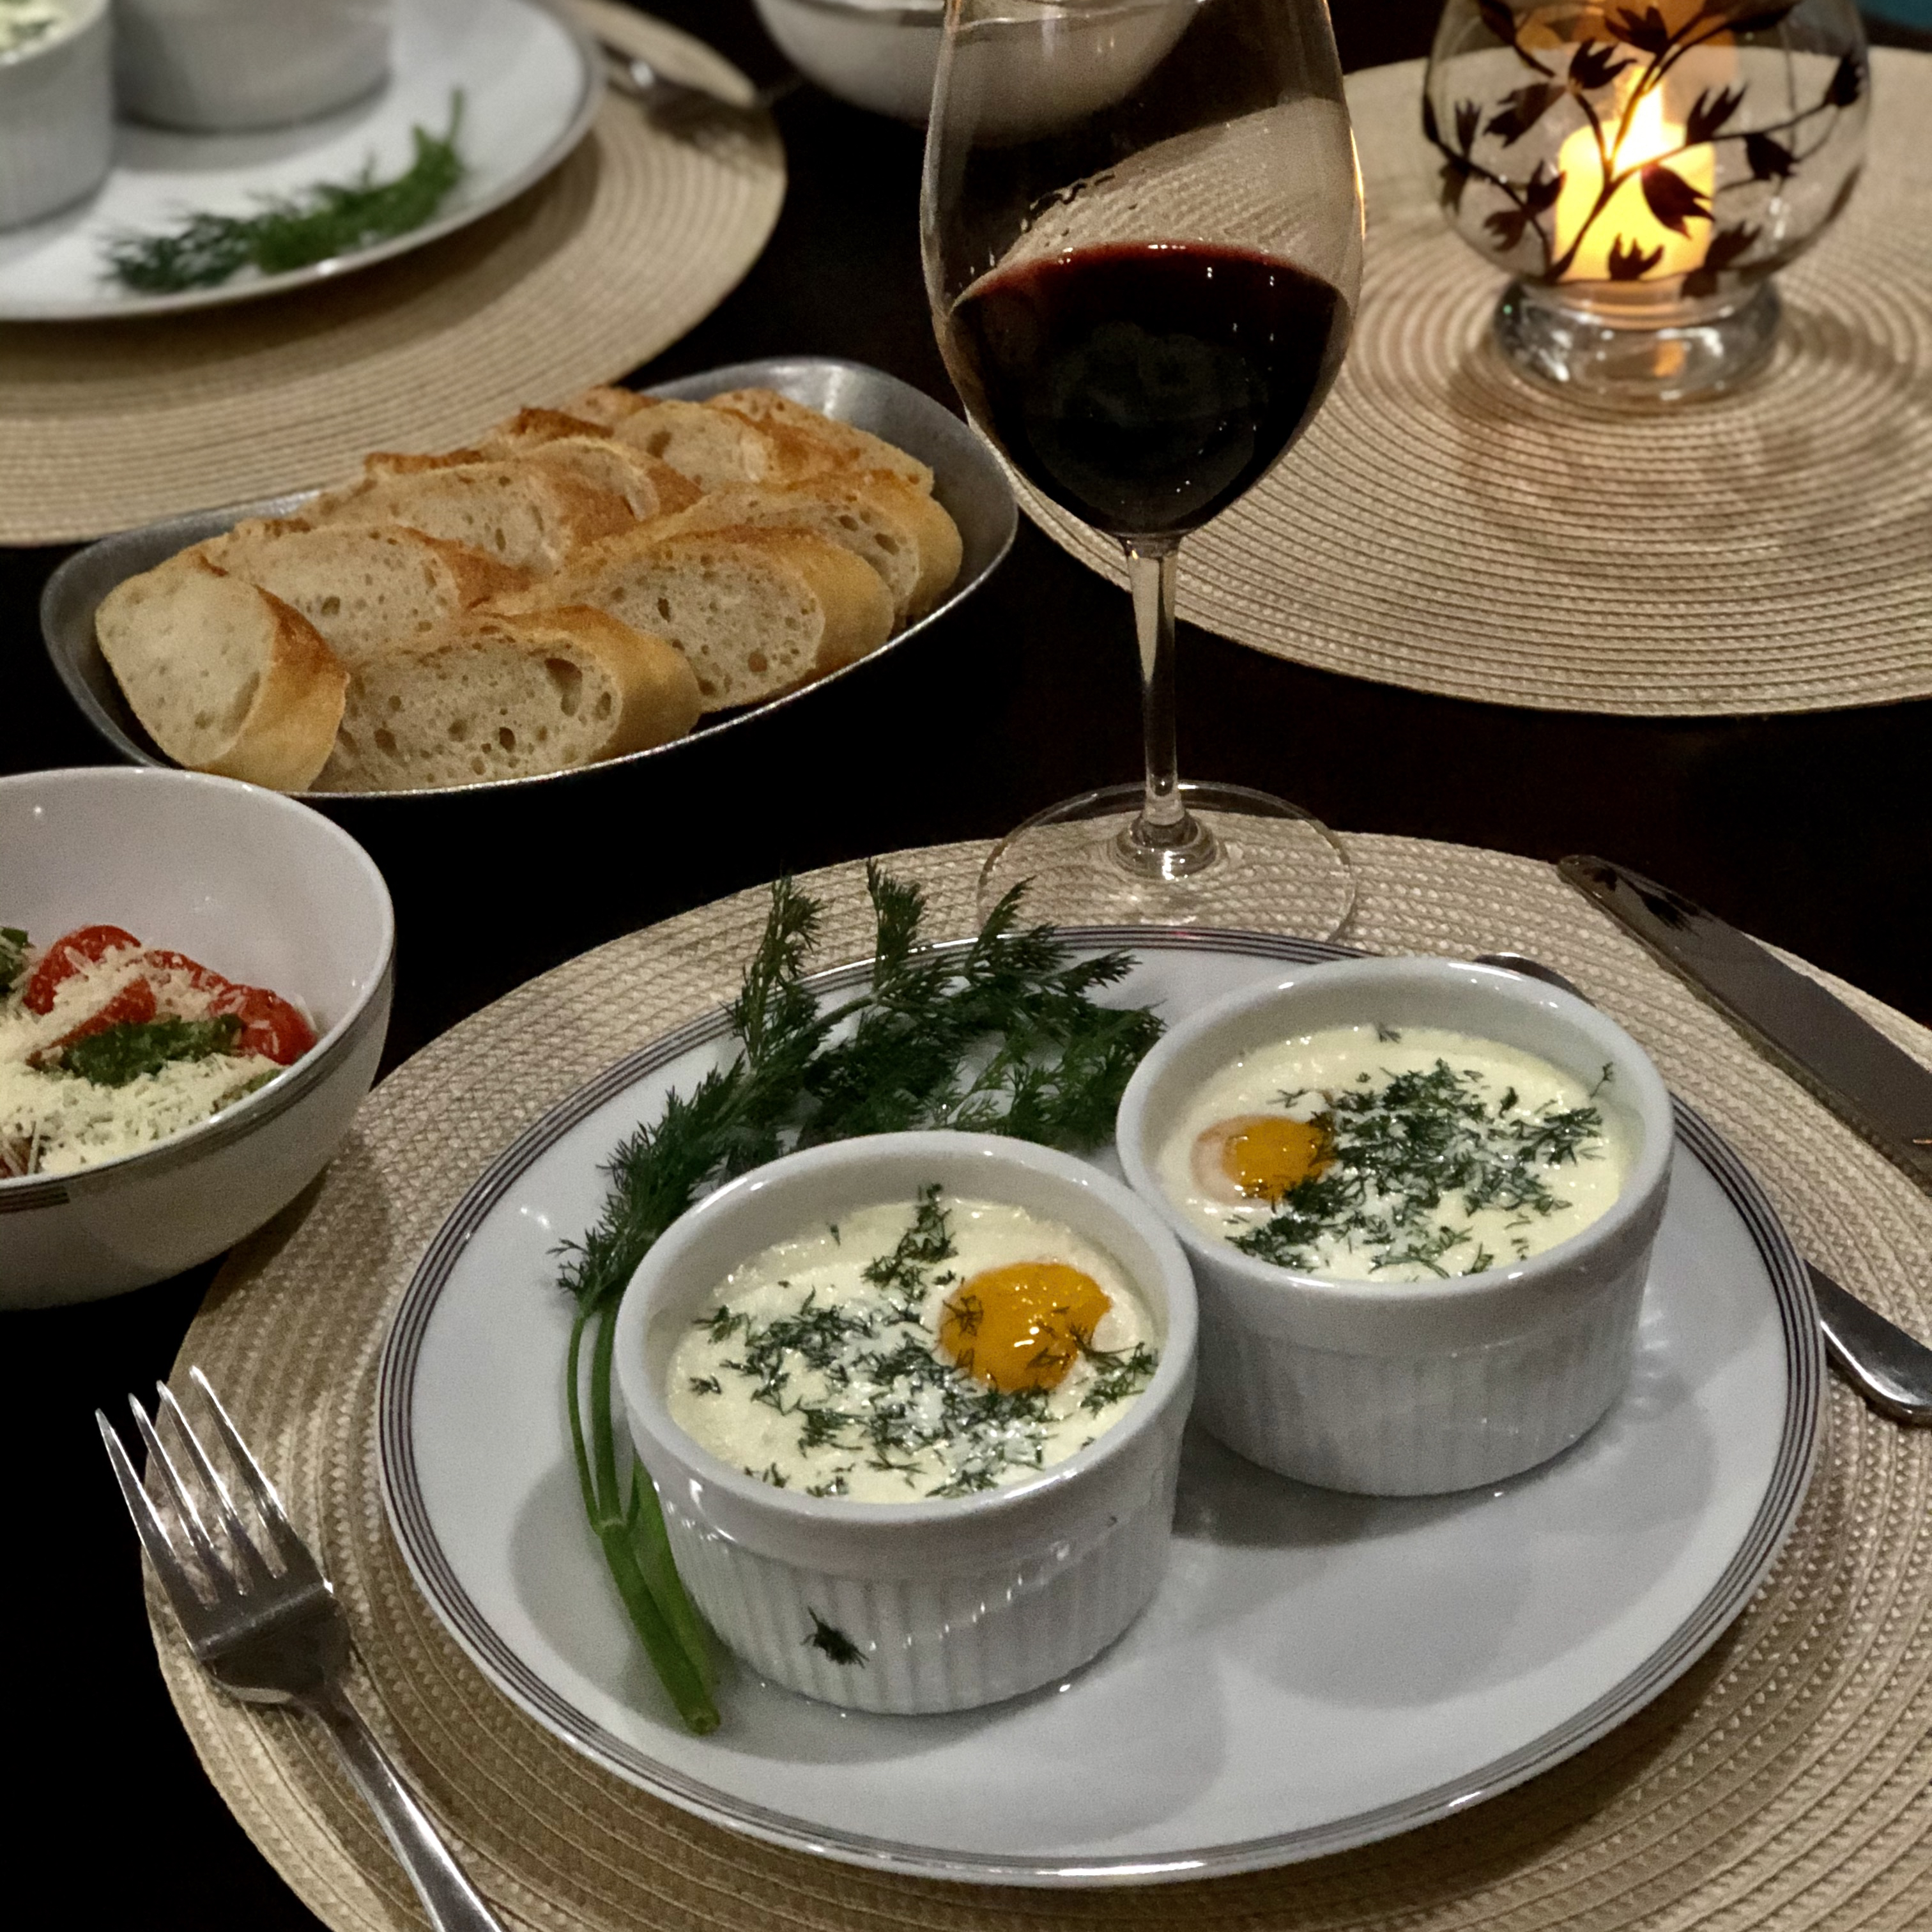 Oeufs Cocottes au Saumon (Baked Eggs with Smoked Salmon) 